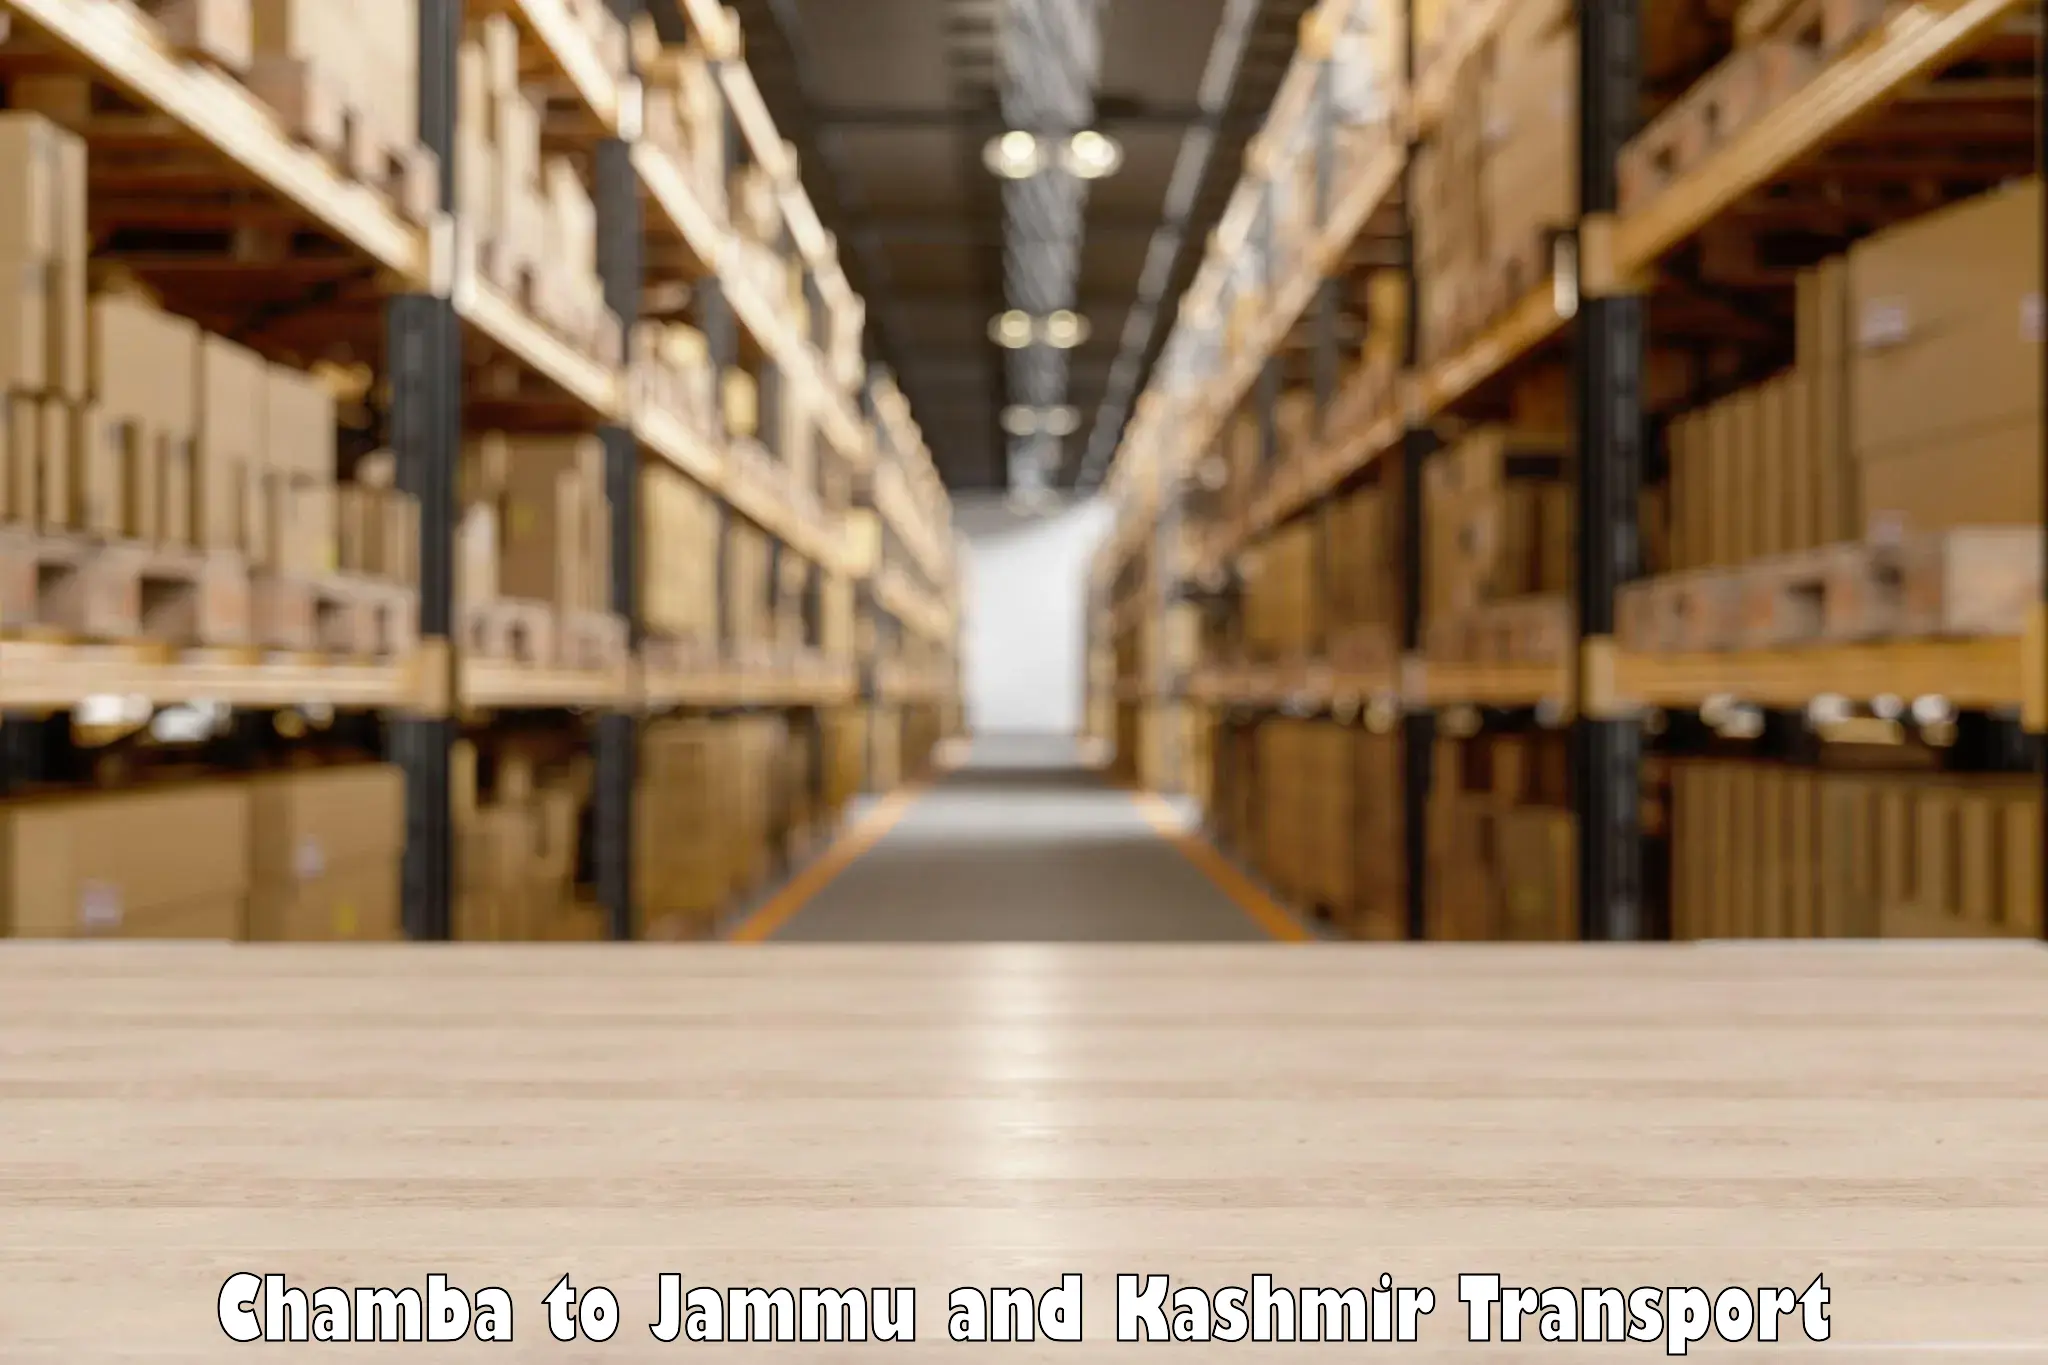 Daily transport service in Chamba to Baramulla